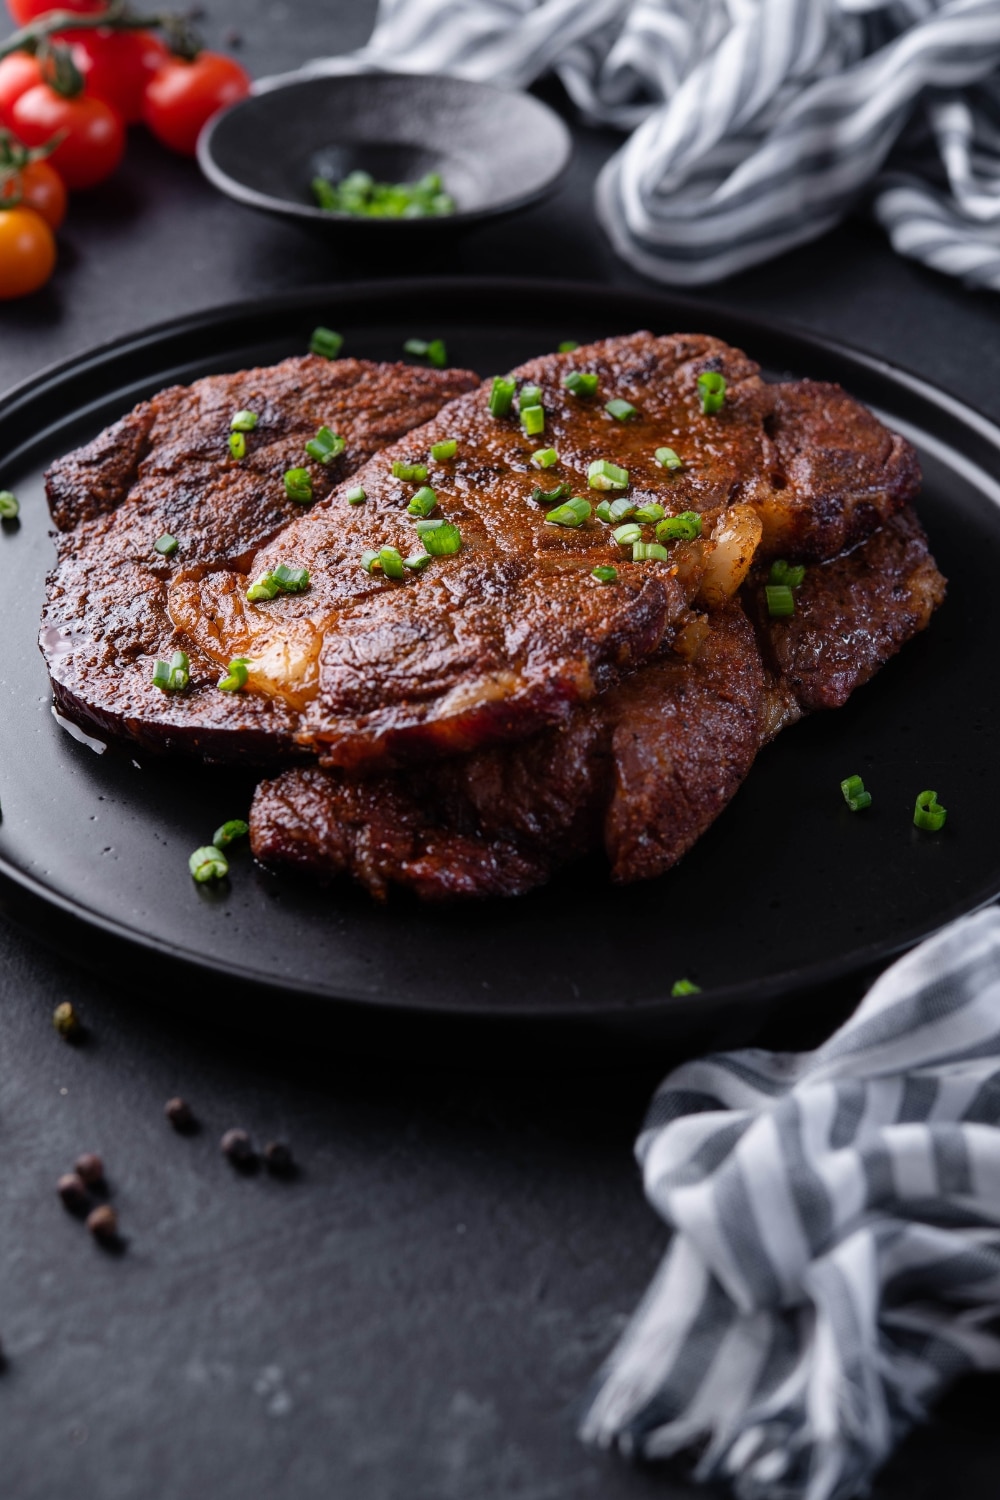 A closer look at grilled ribeye steaks garnished with spring onions on a black plate.